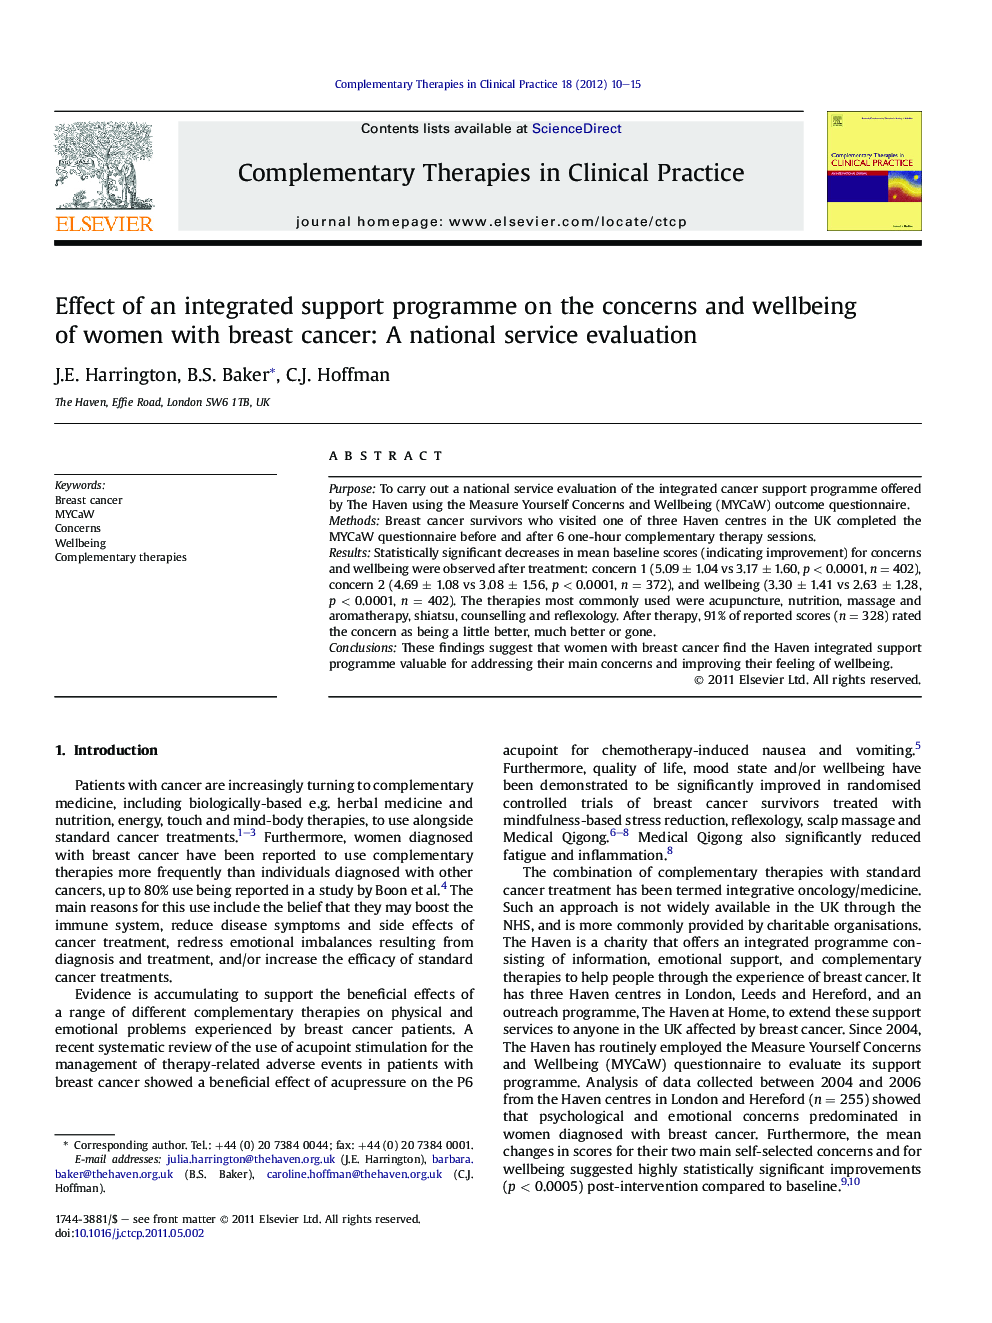 Effect of an integrated support programme on the concerns and wellbeing of women with breast cancer: A national service evaluation